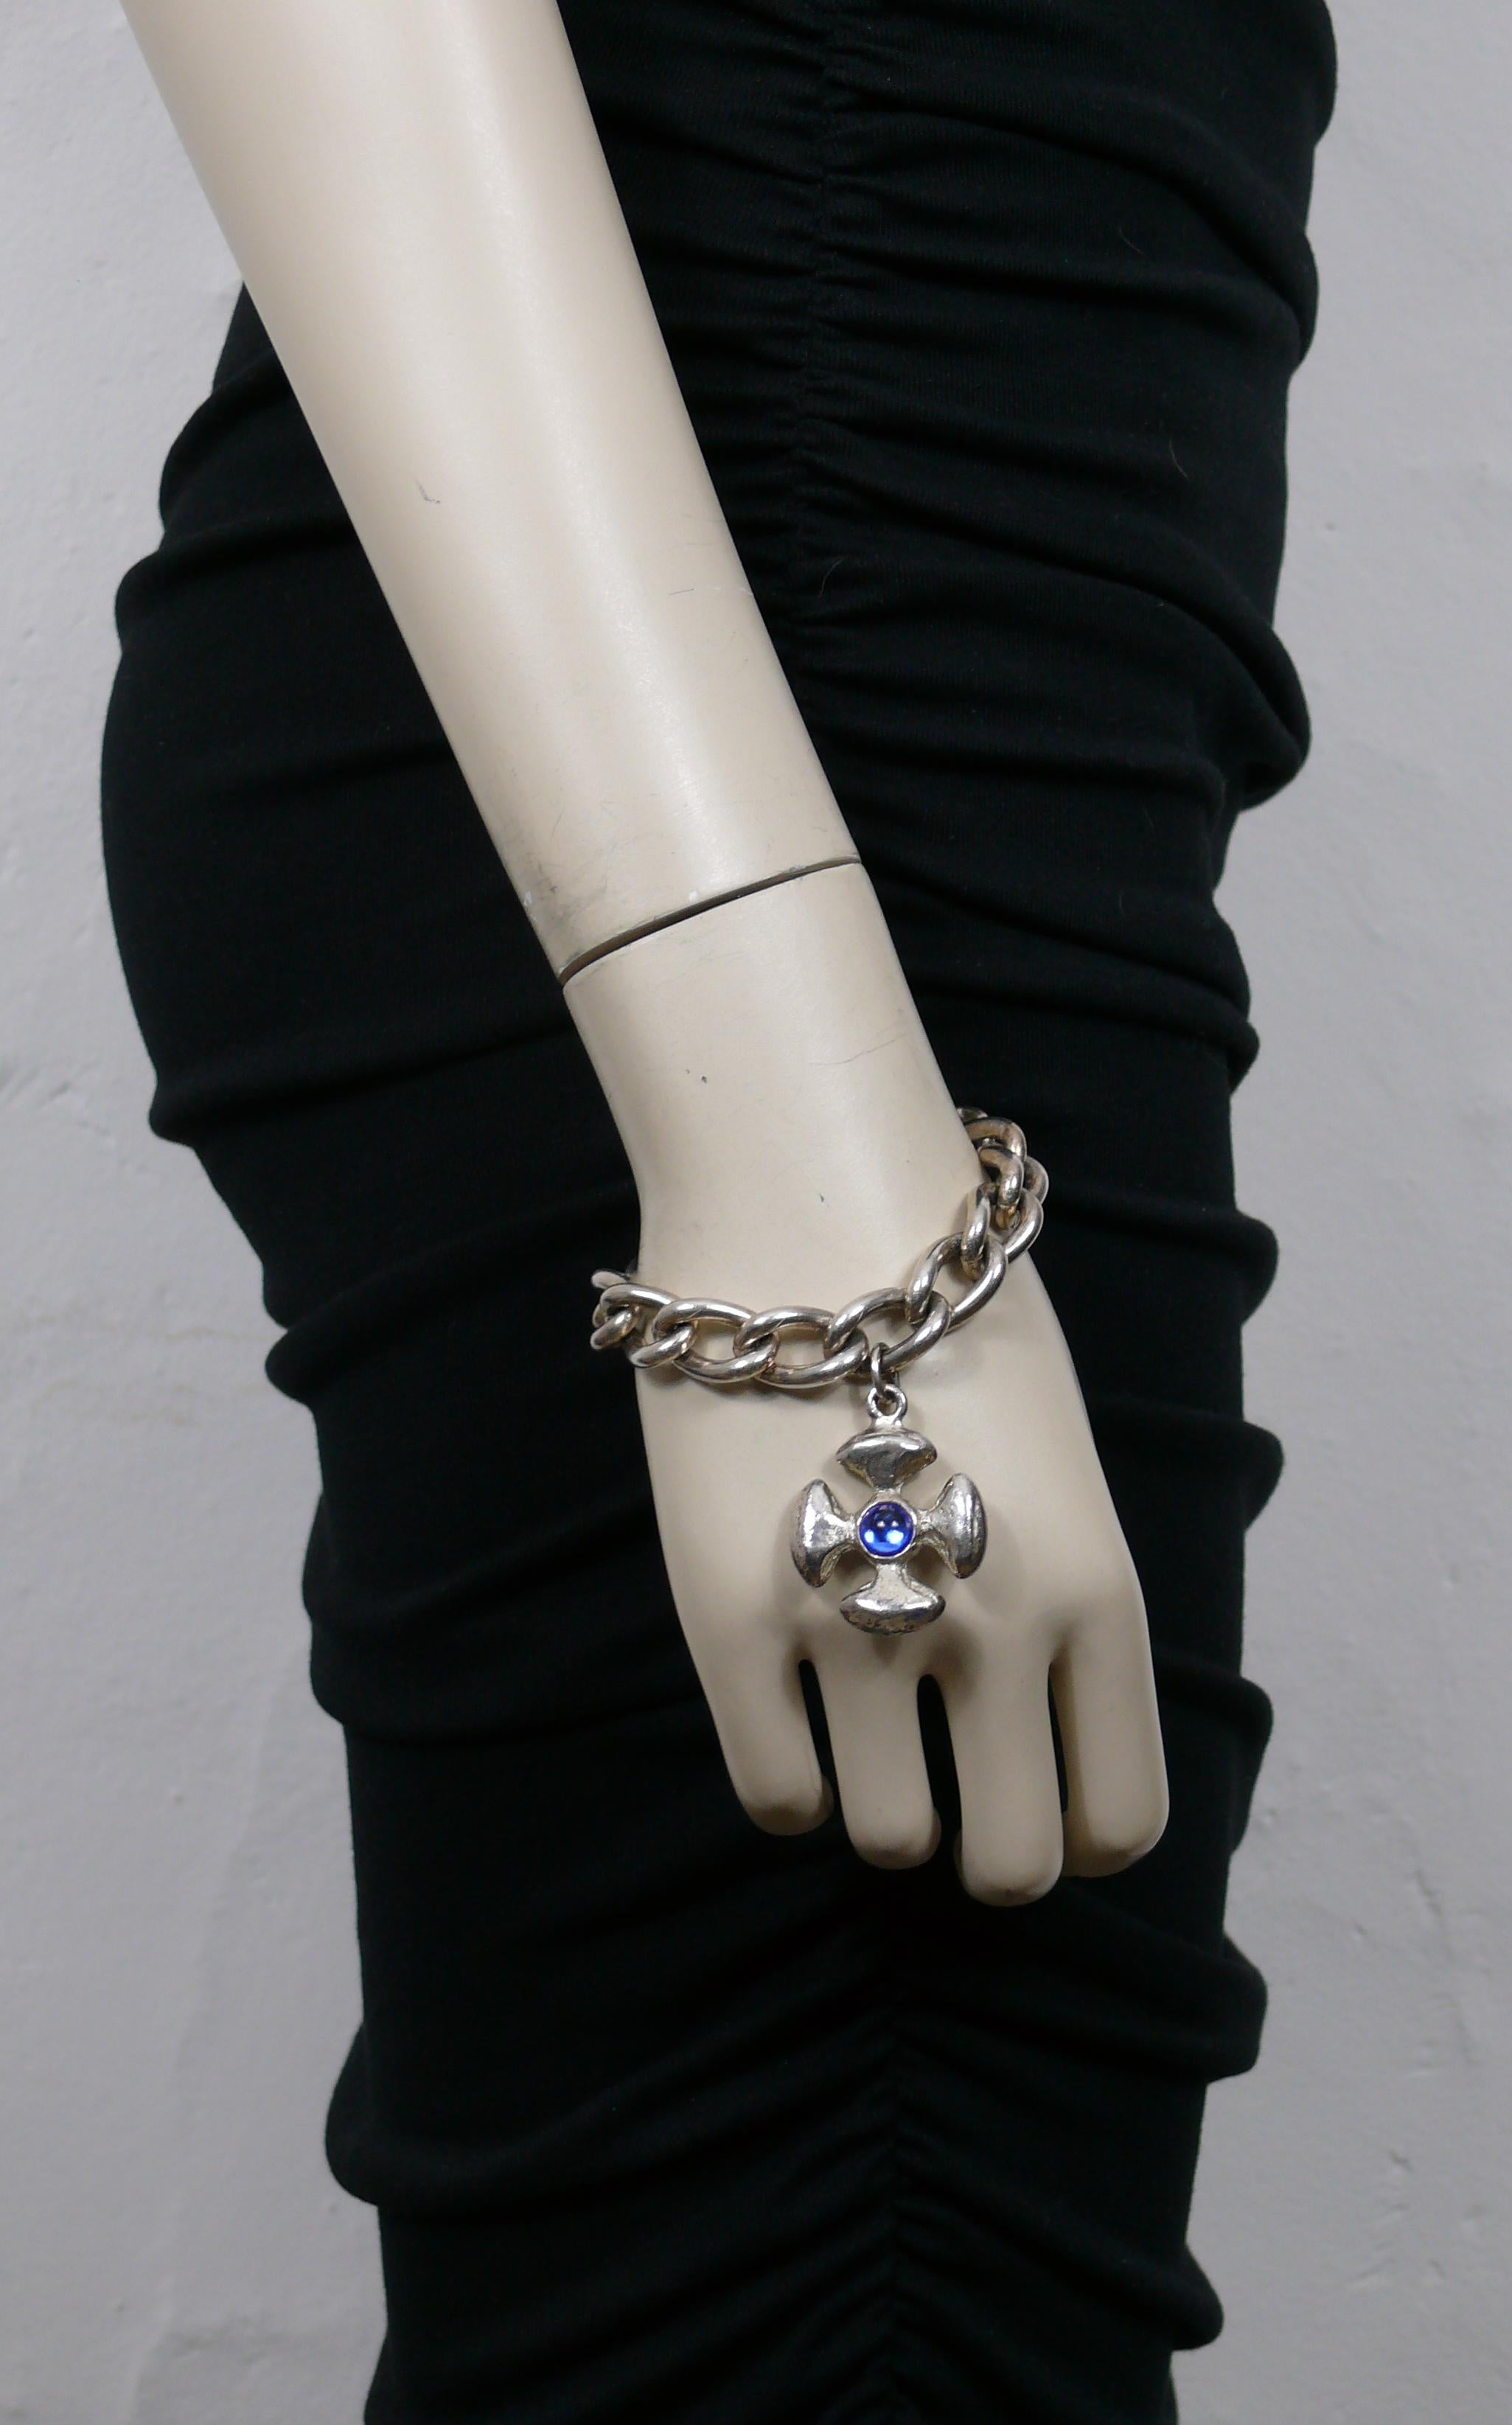 YVES SAINT LAURENT vintage silver tone chain bracelet featuring a Maltese cross charm embellished with blue glass cabochons.

T-bar and love heart toggle clasp closure.

Embossed  YVES SAINT LAURENT Made in France.

Indicative measurements : length